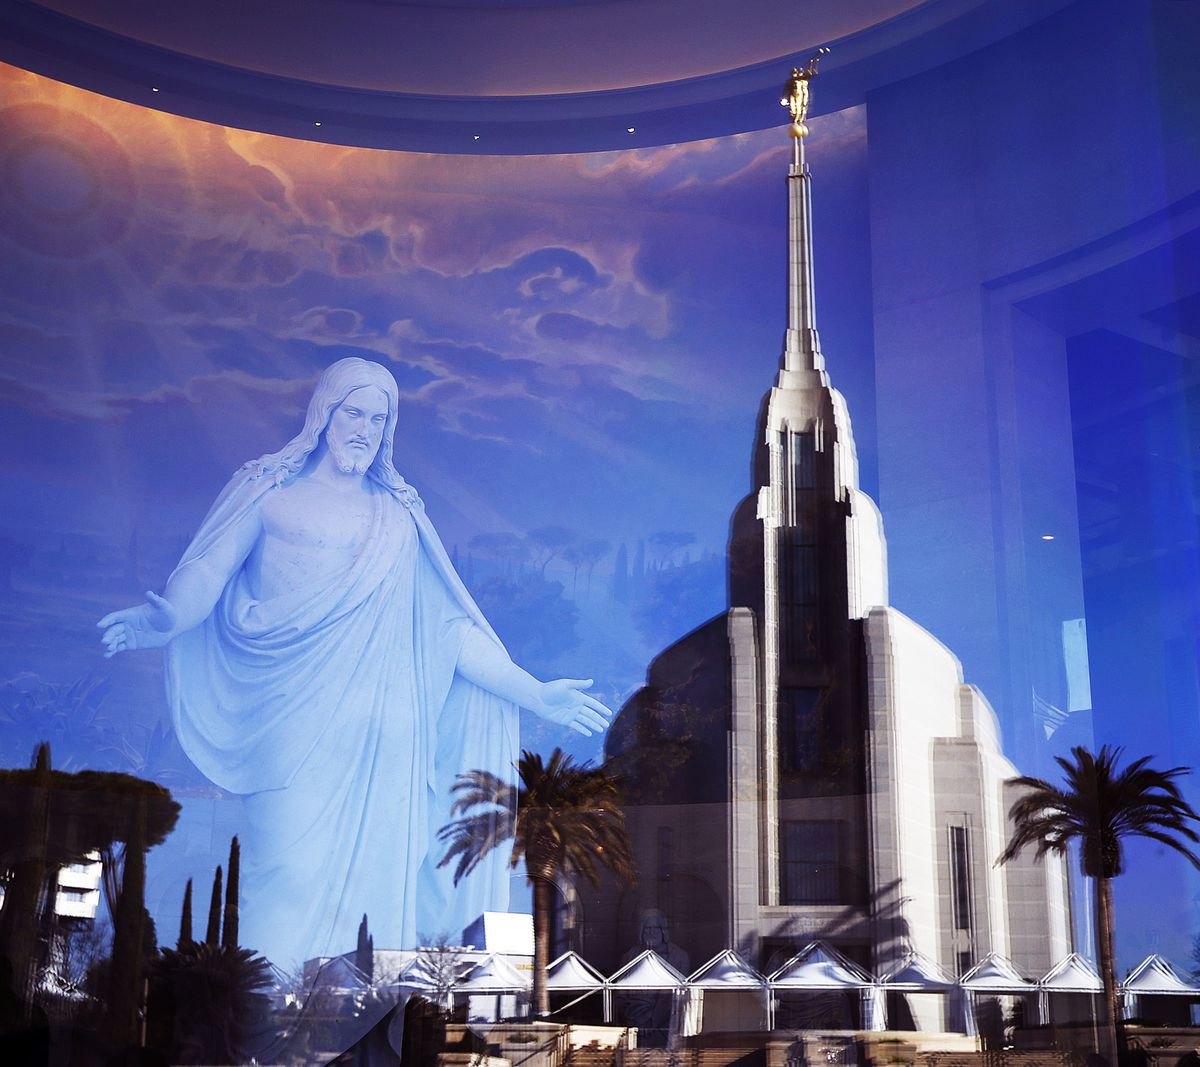 The Rome Italy Temple is reflected in the window of the Rome Temple Visitors Center of The Church of Jesus Christ of Latter-day Saints on Monday, Jan. 14, 2019.